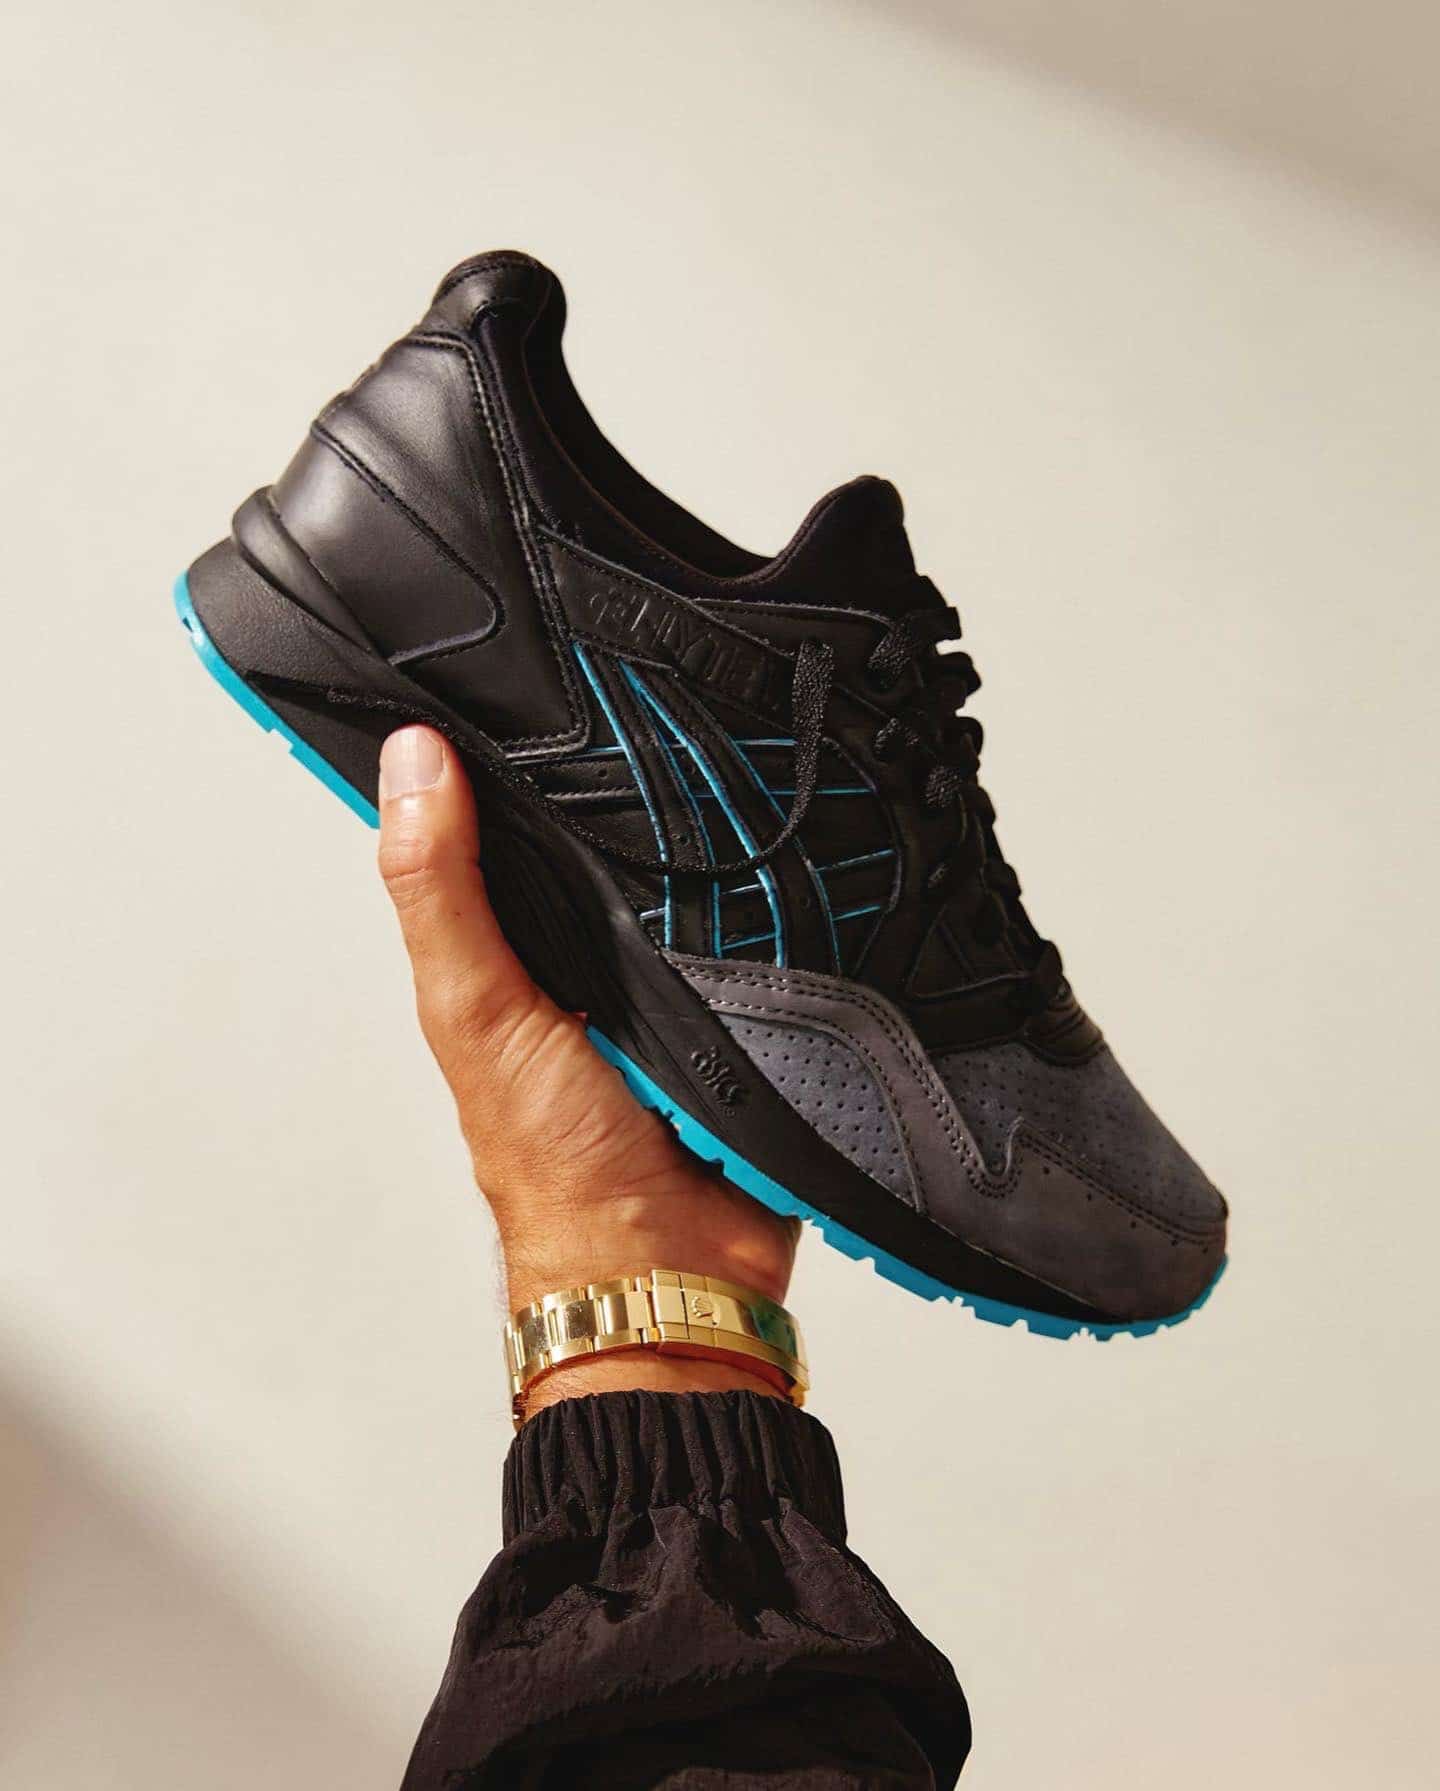 Comeback After 10 Years - Ronnie Fieg Brings Back the ASICS 